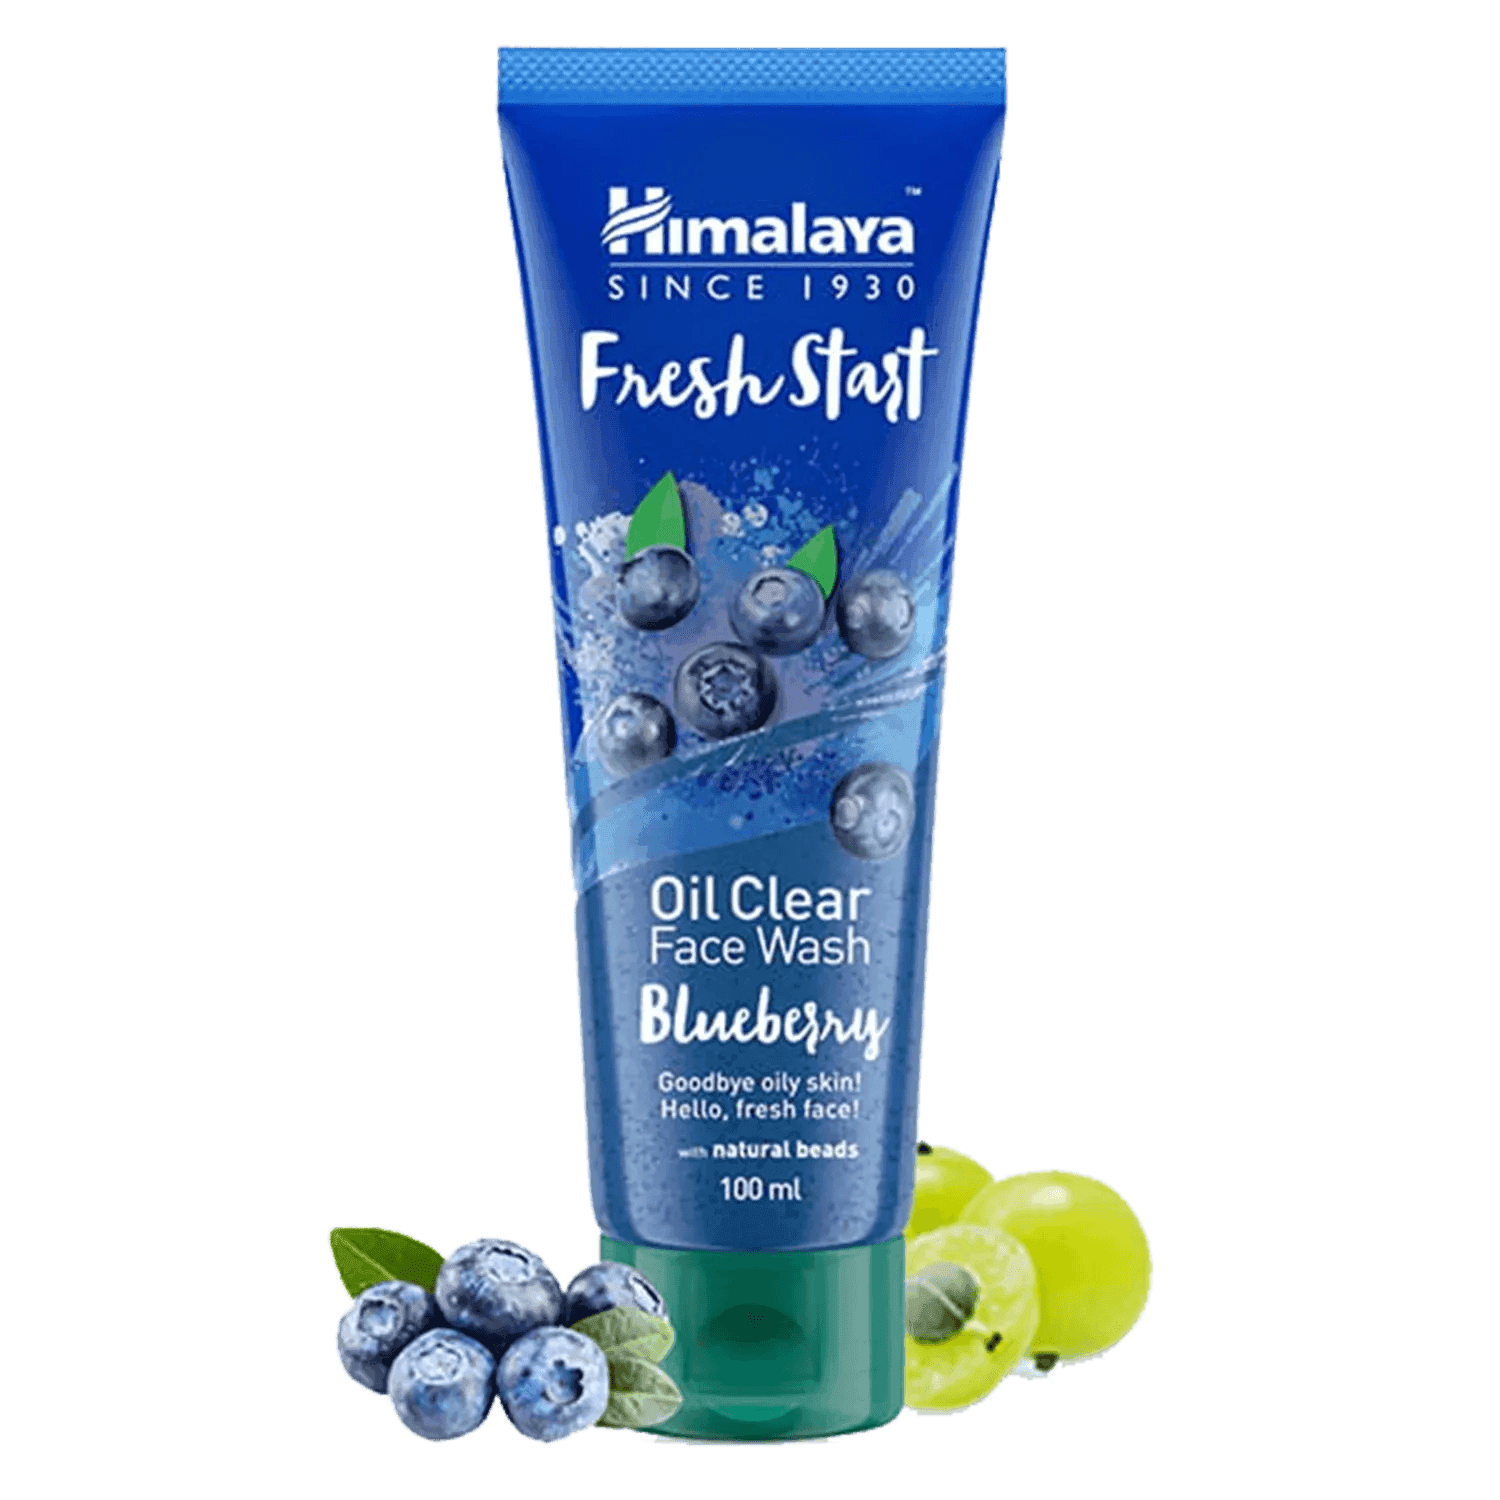 himalaya blueberry oil clear face wash (150ml)